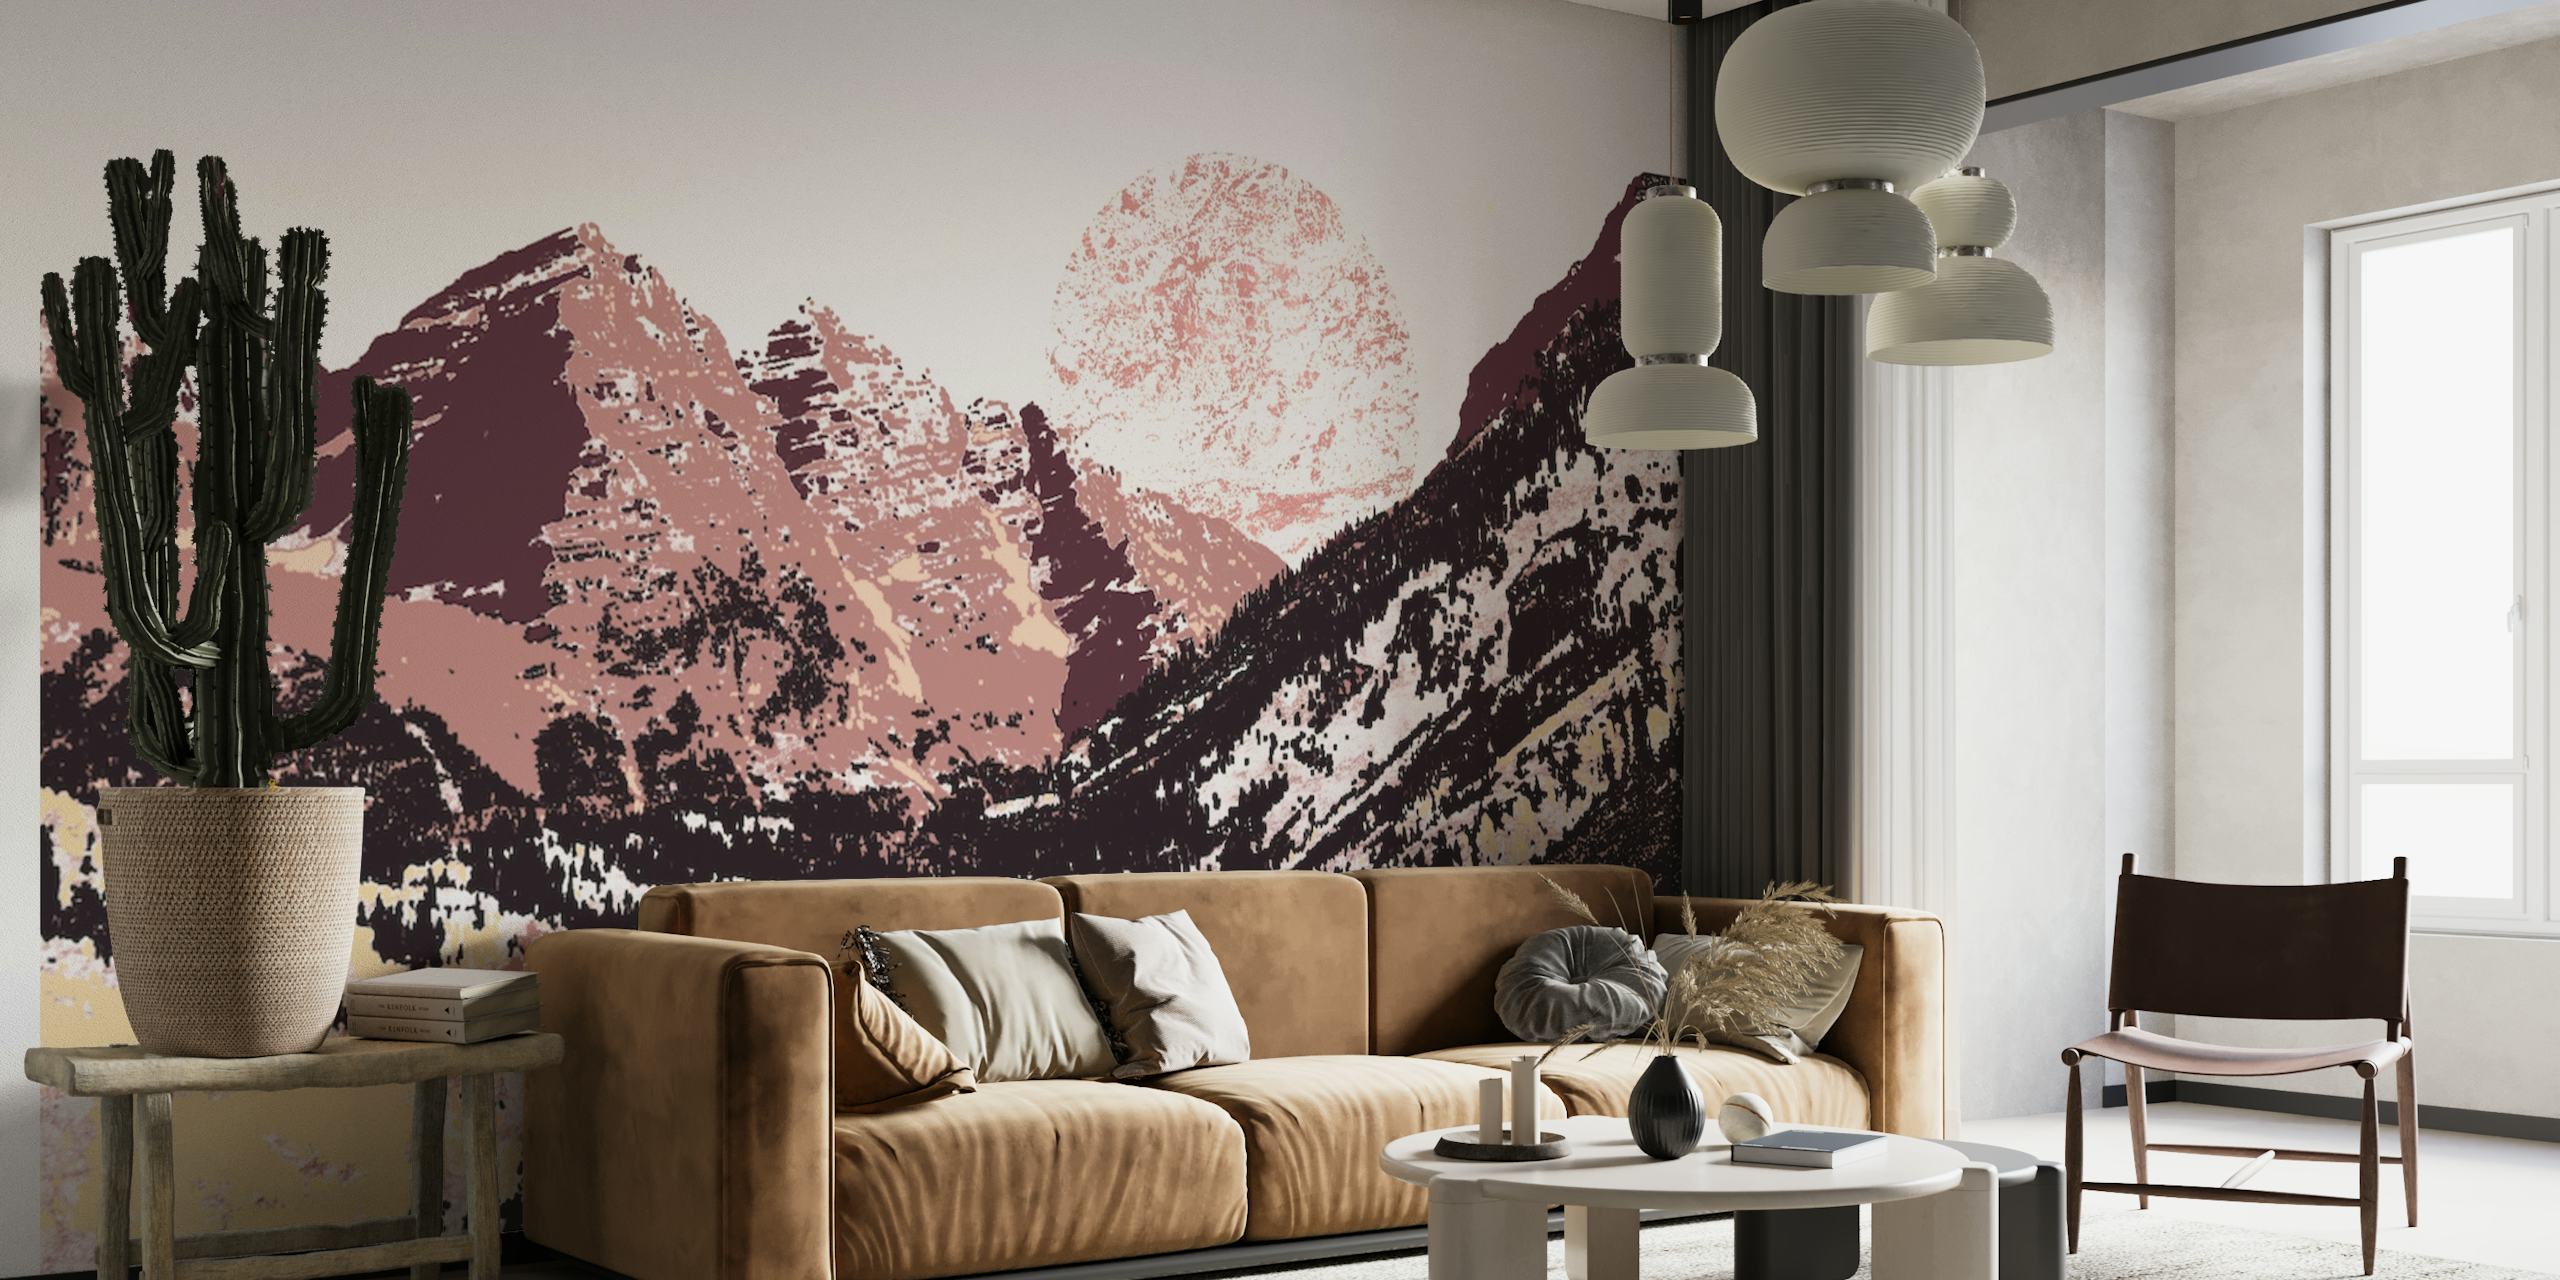 A wall mural of a mountain range with earthy brown tones and sunrise hues